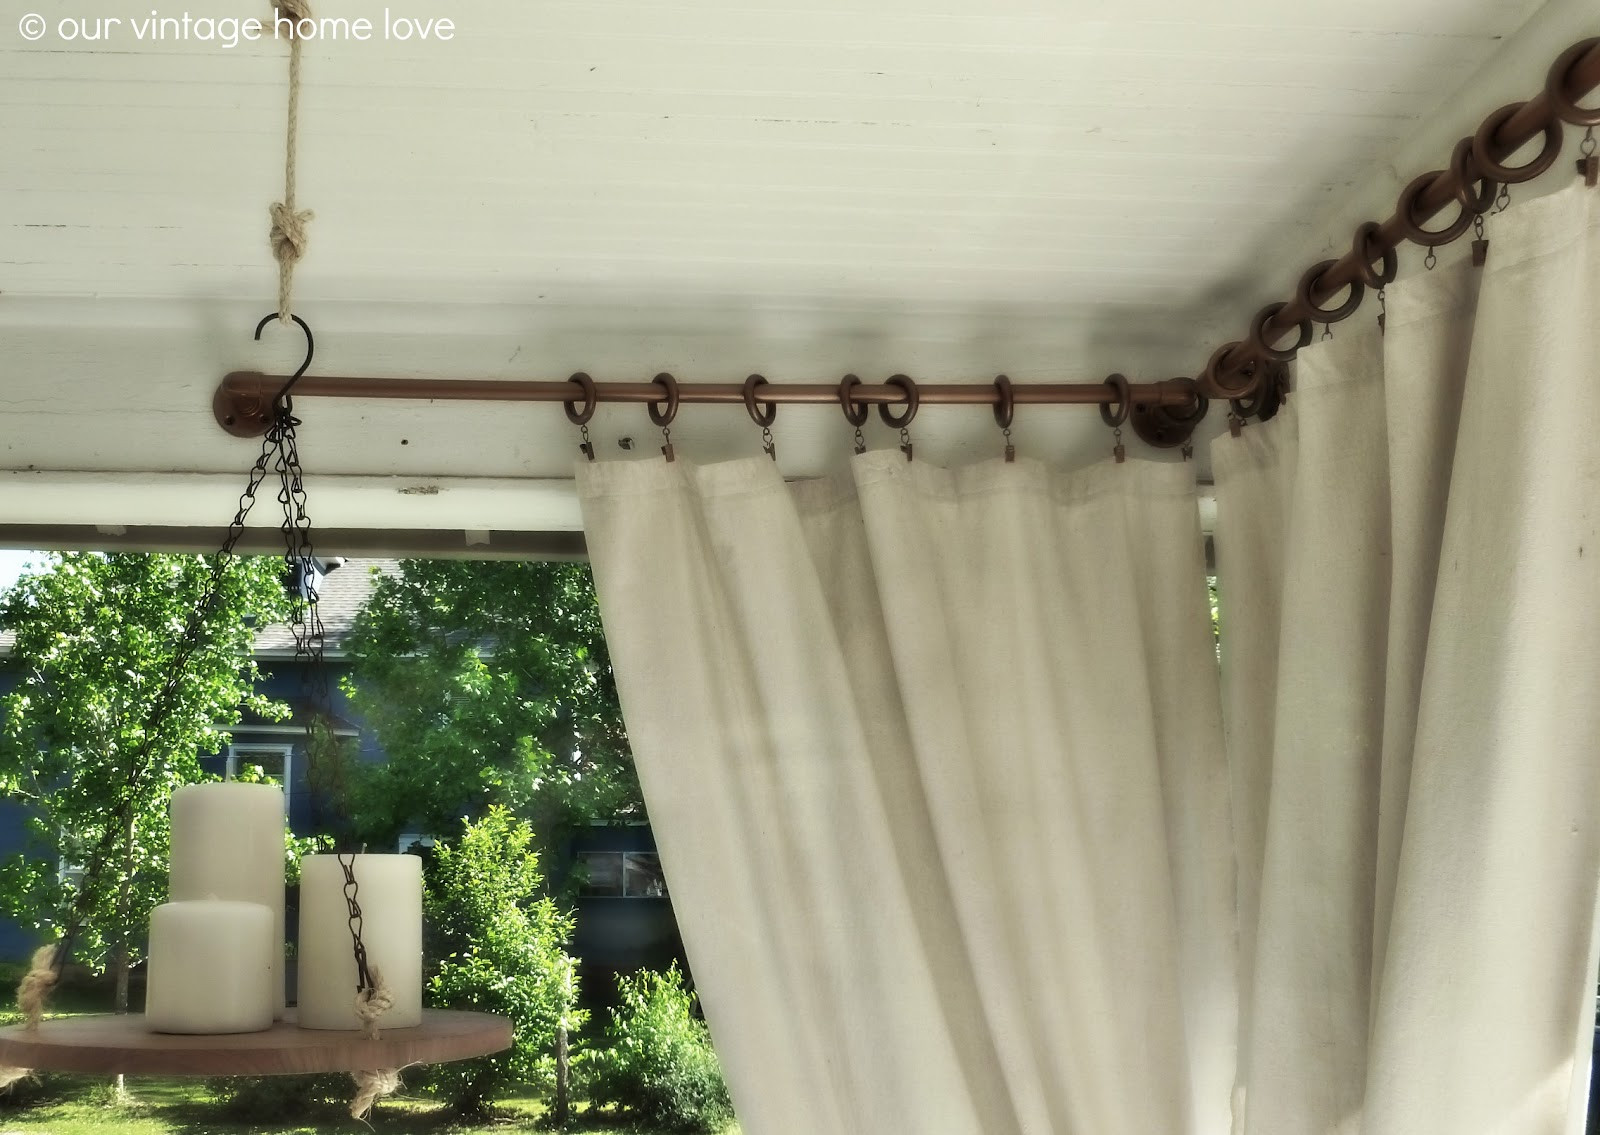 DIY Outdoor Curtain Rods
 vintage home love Back Side Porch Ideas For Summer and An